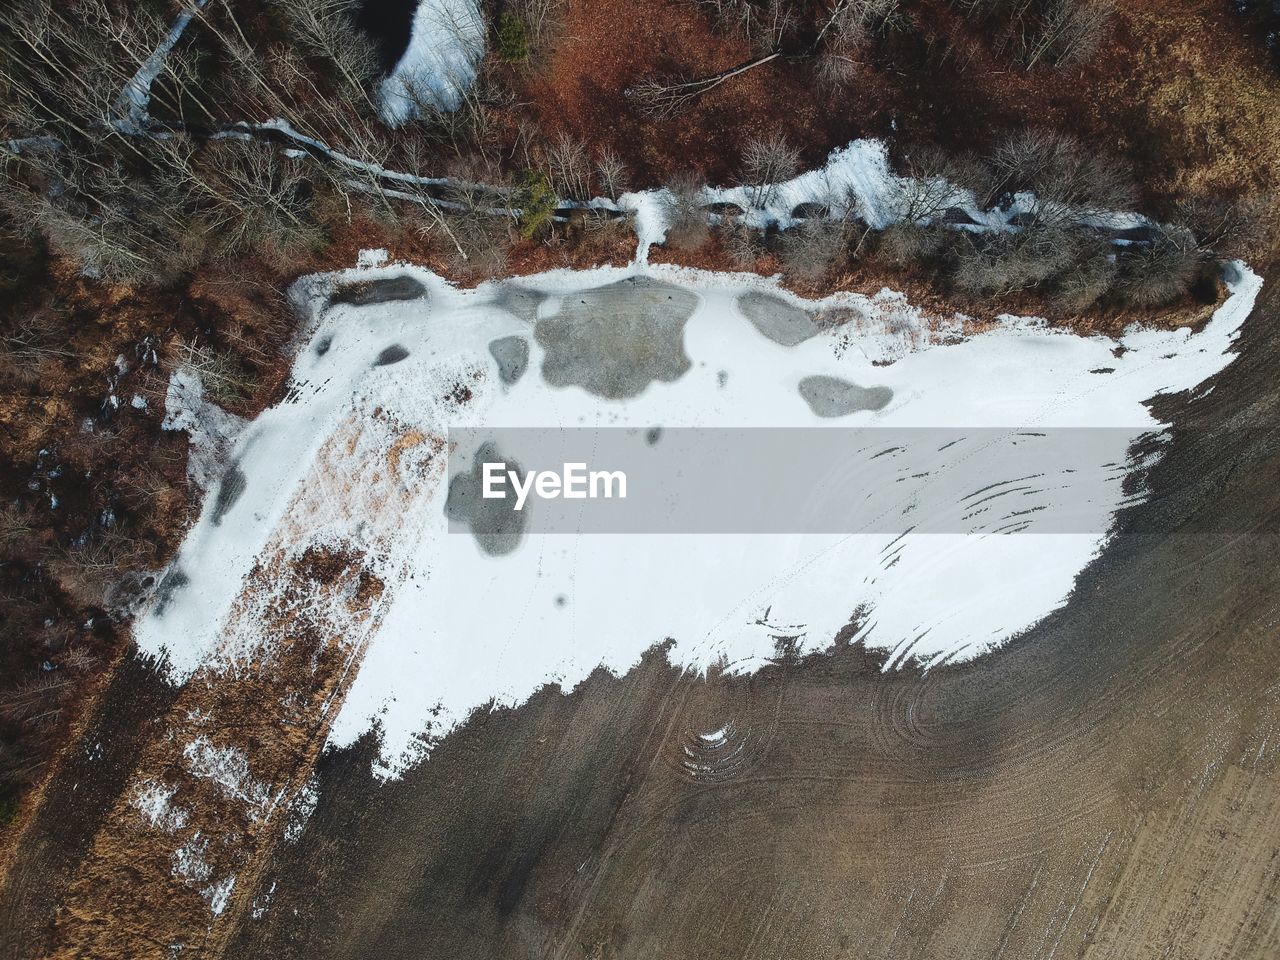 HIGH ANGLE VIEW OF ICE ON LAND